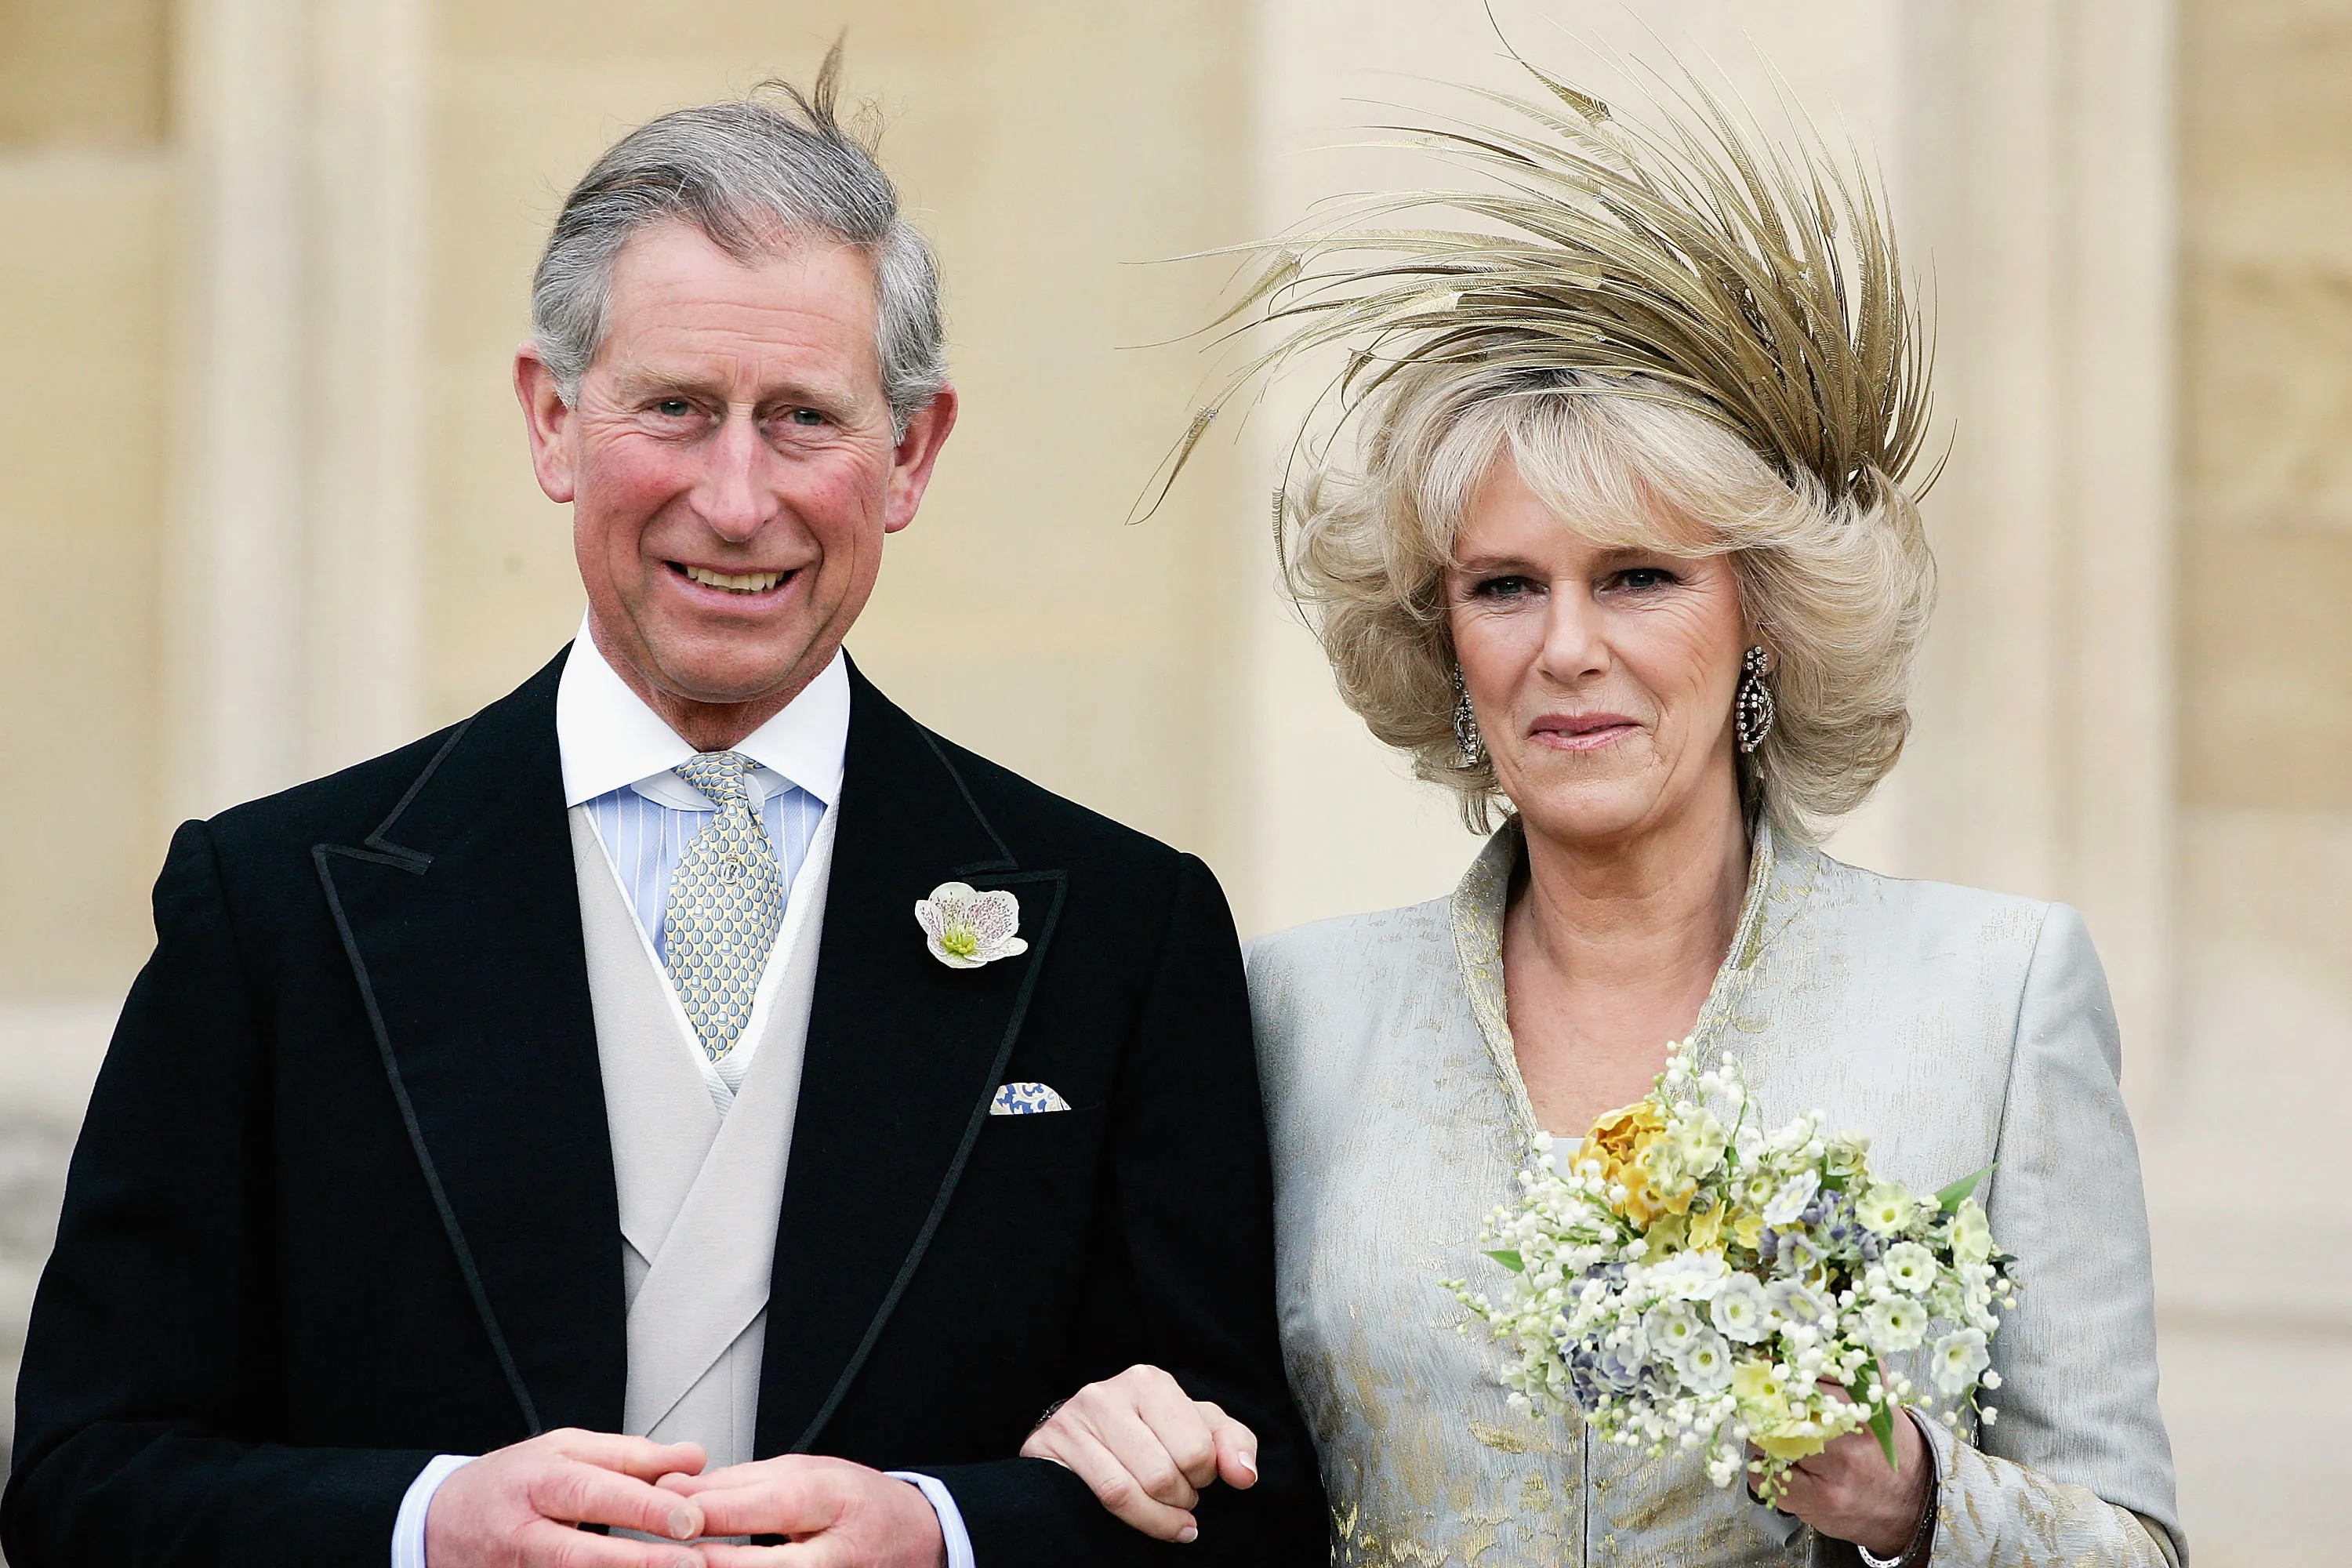 Prince Charles and his wife Camilla's visit to Canada this week comes amid dwindling support for the monarchy in the country.